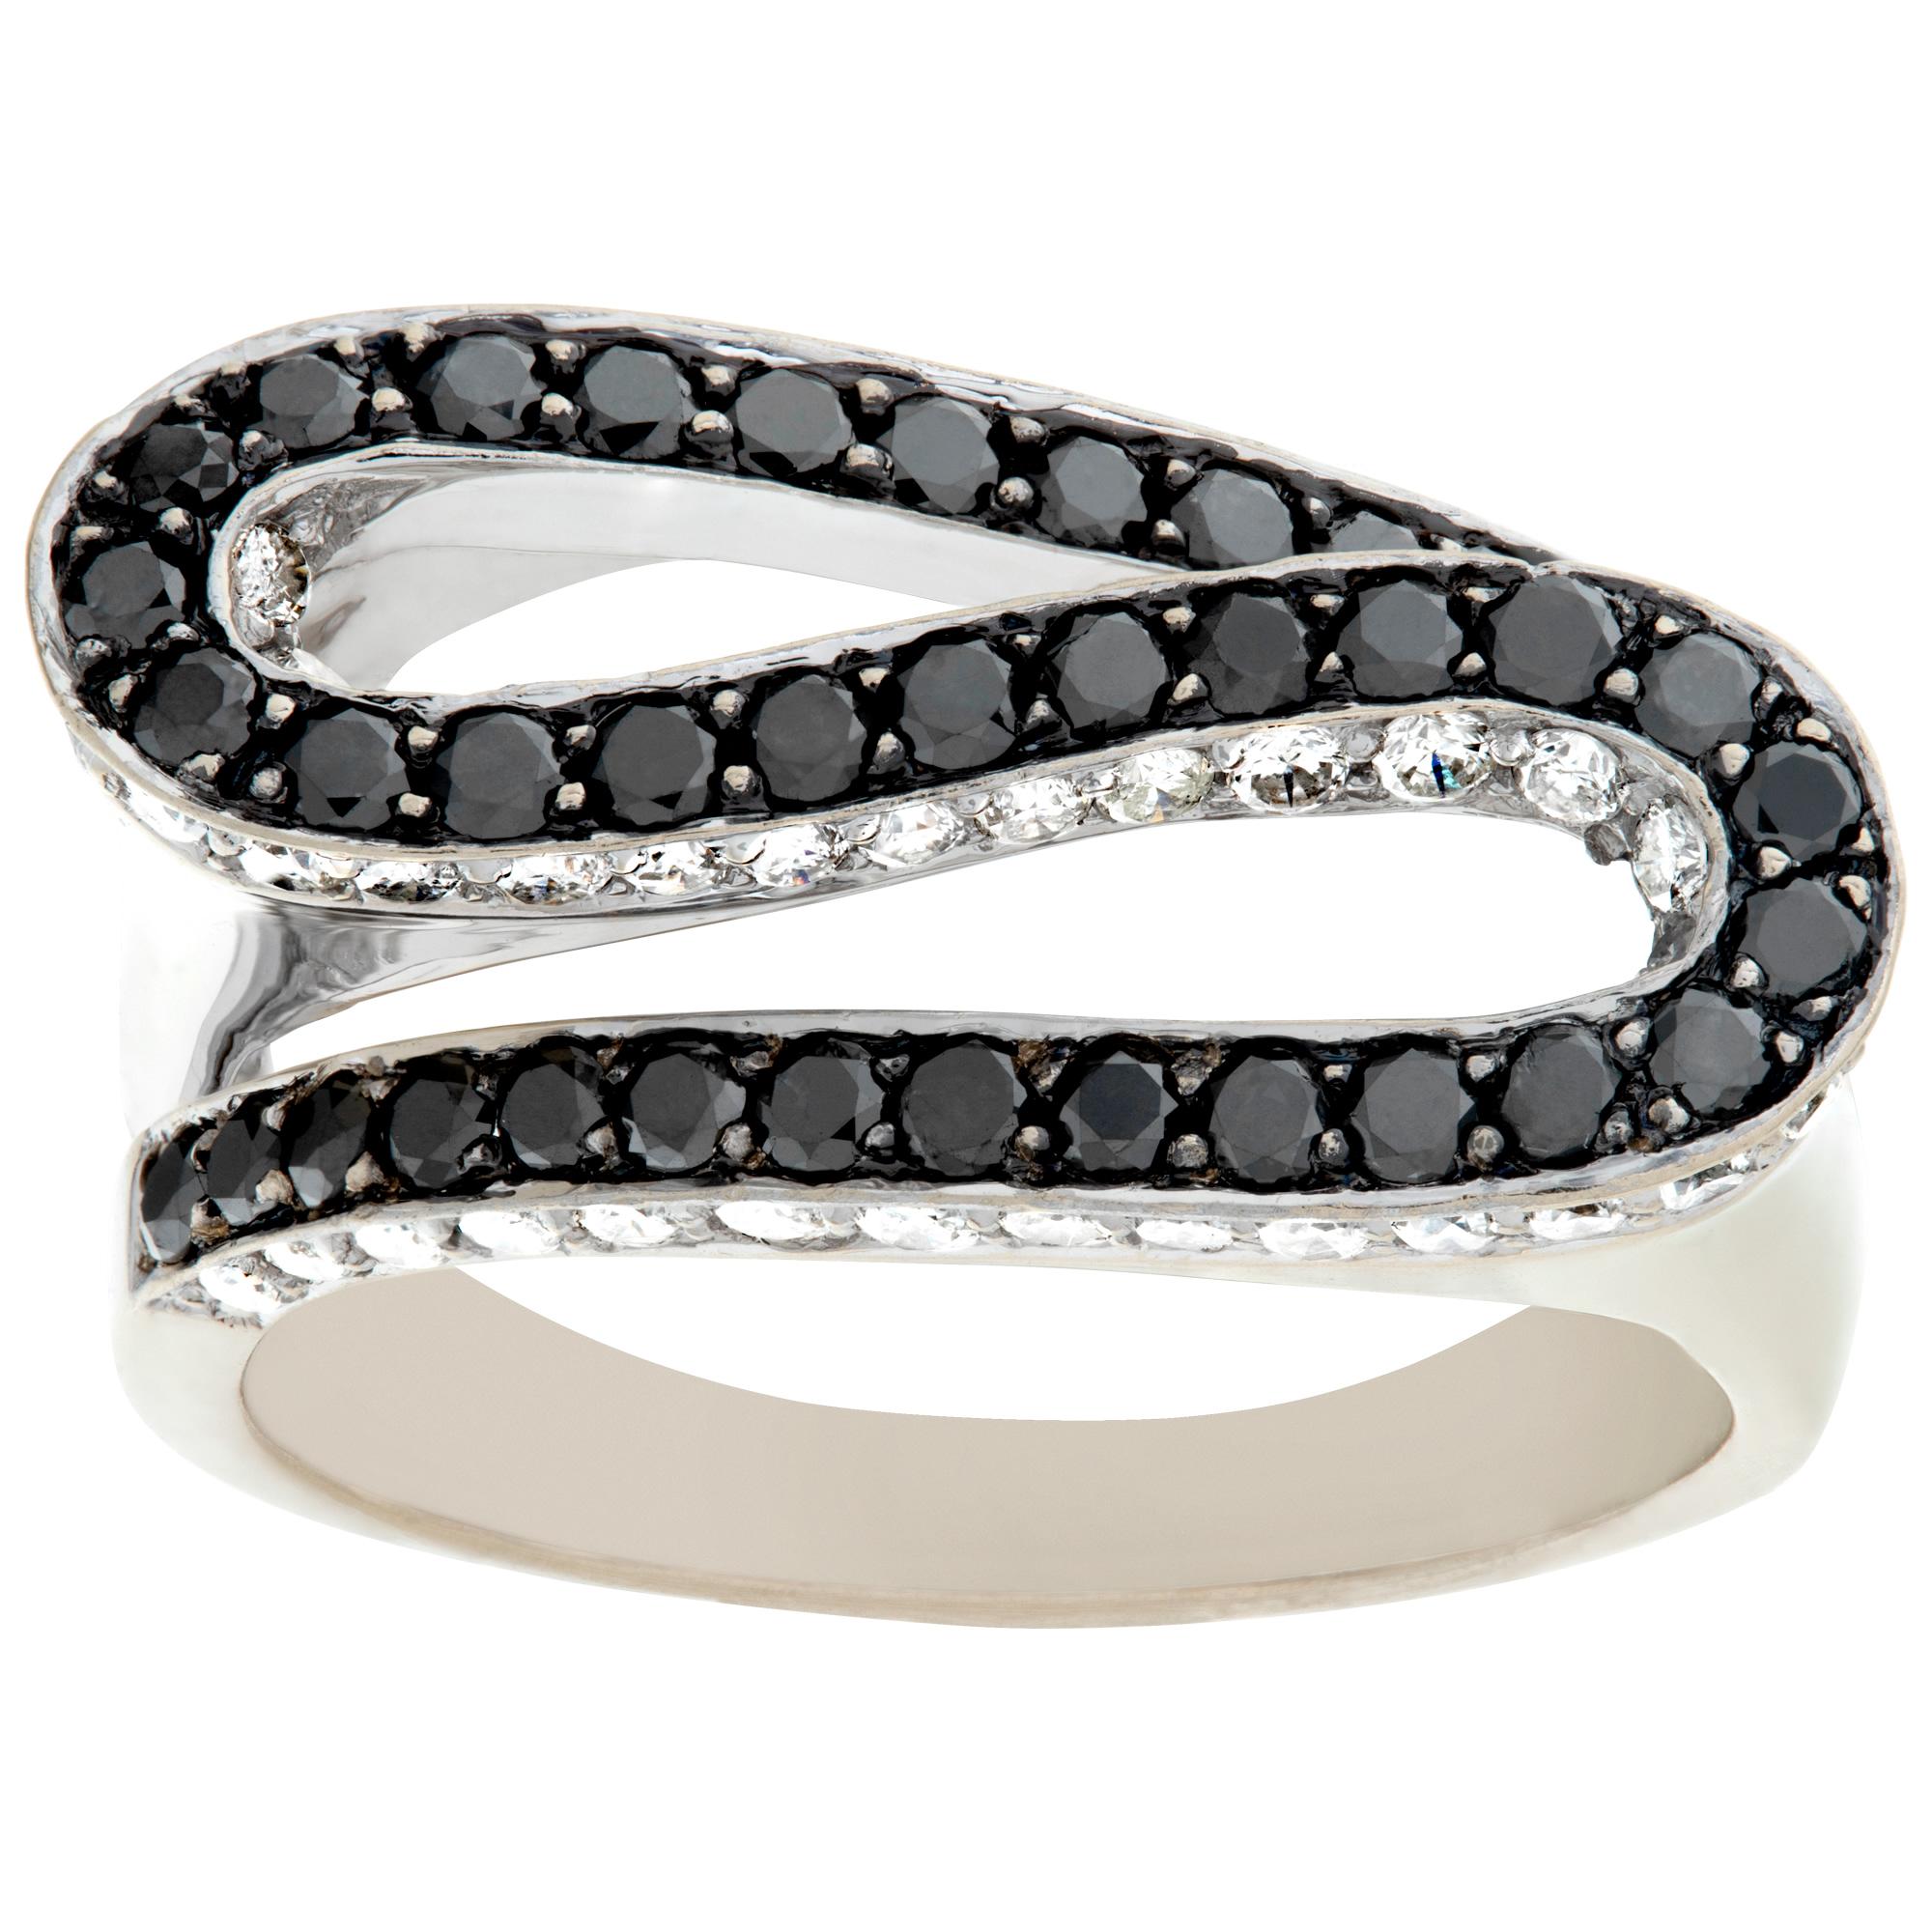 Black and white diamonds modern wavy design ring in 18k white gold. White full cut diamonds total approx. weight: 0.50 carat. White and eye clean. Size 8.This Diamond ring is currently size 8 and some items can be sized up or down, please ask! It